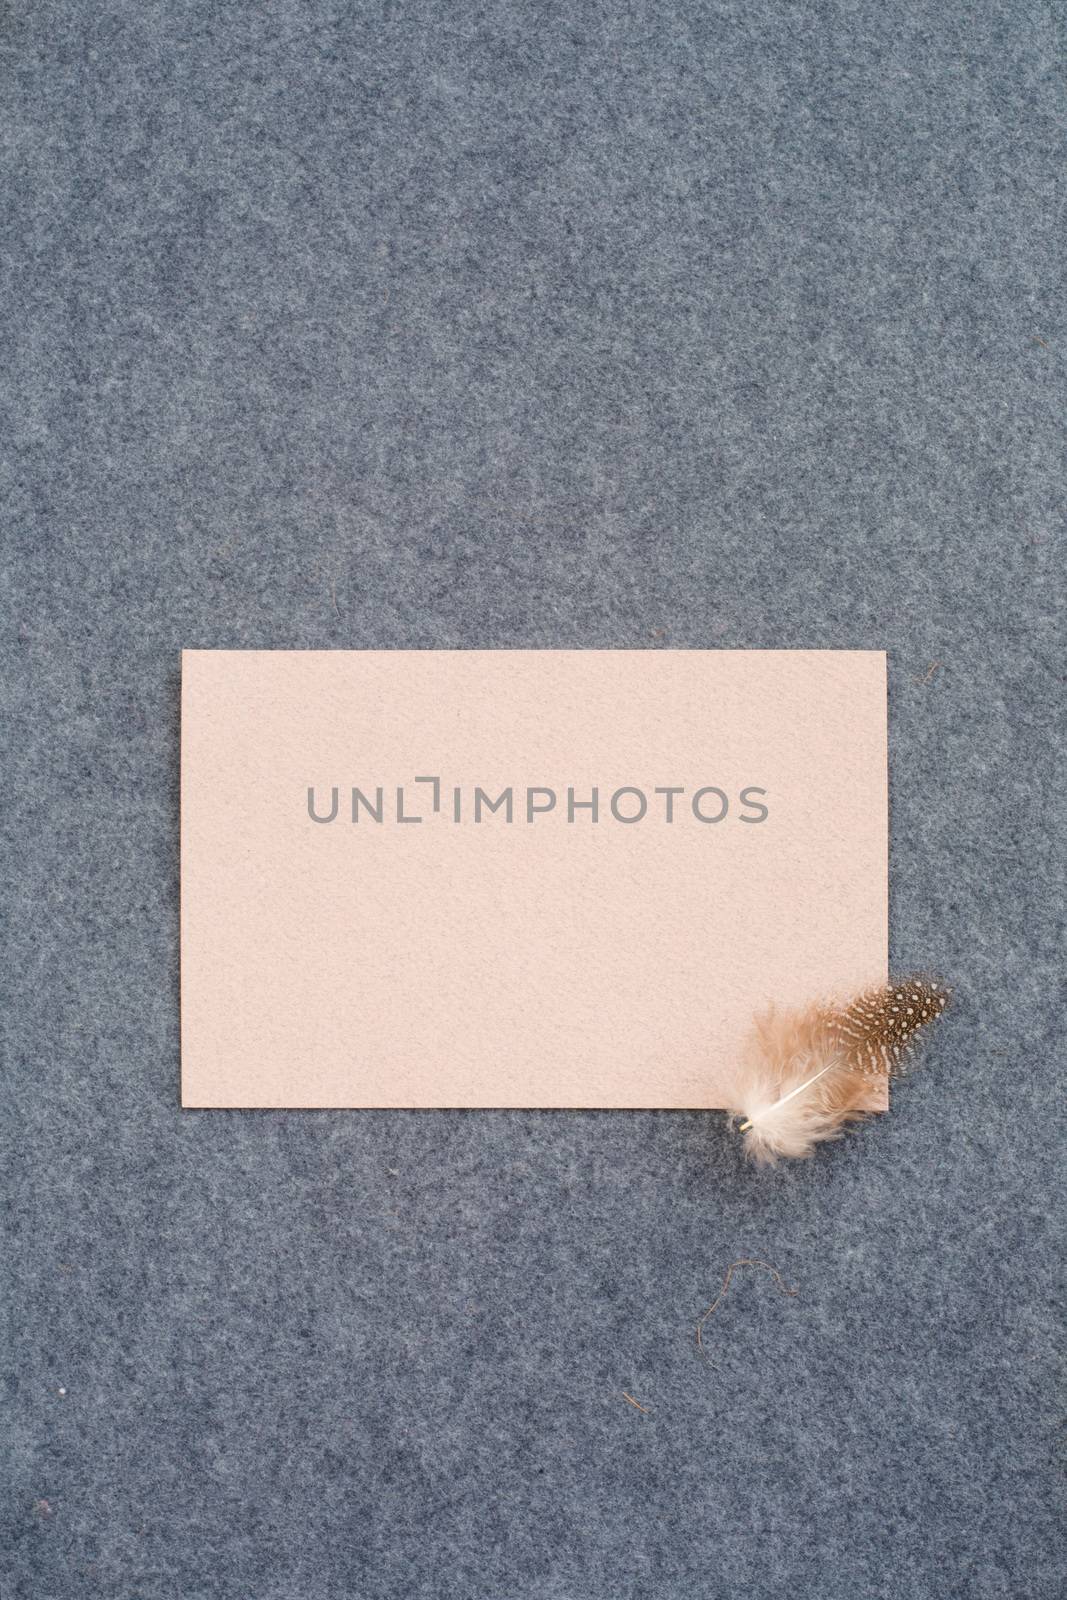 Minimalistic paper easter greeting card and spotted feather on gray textile background